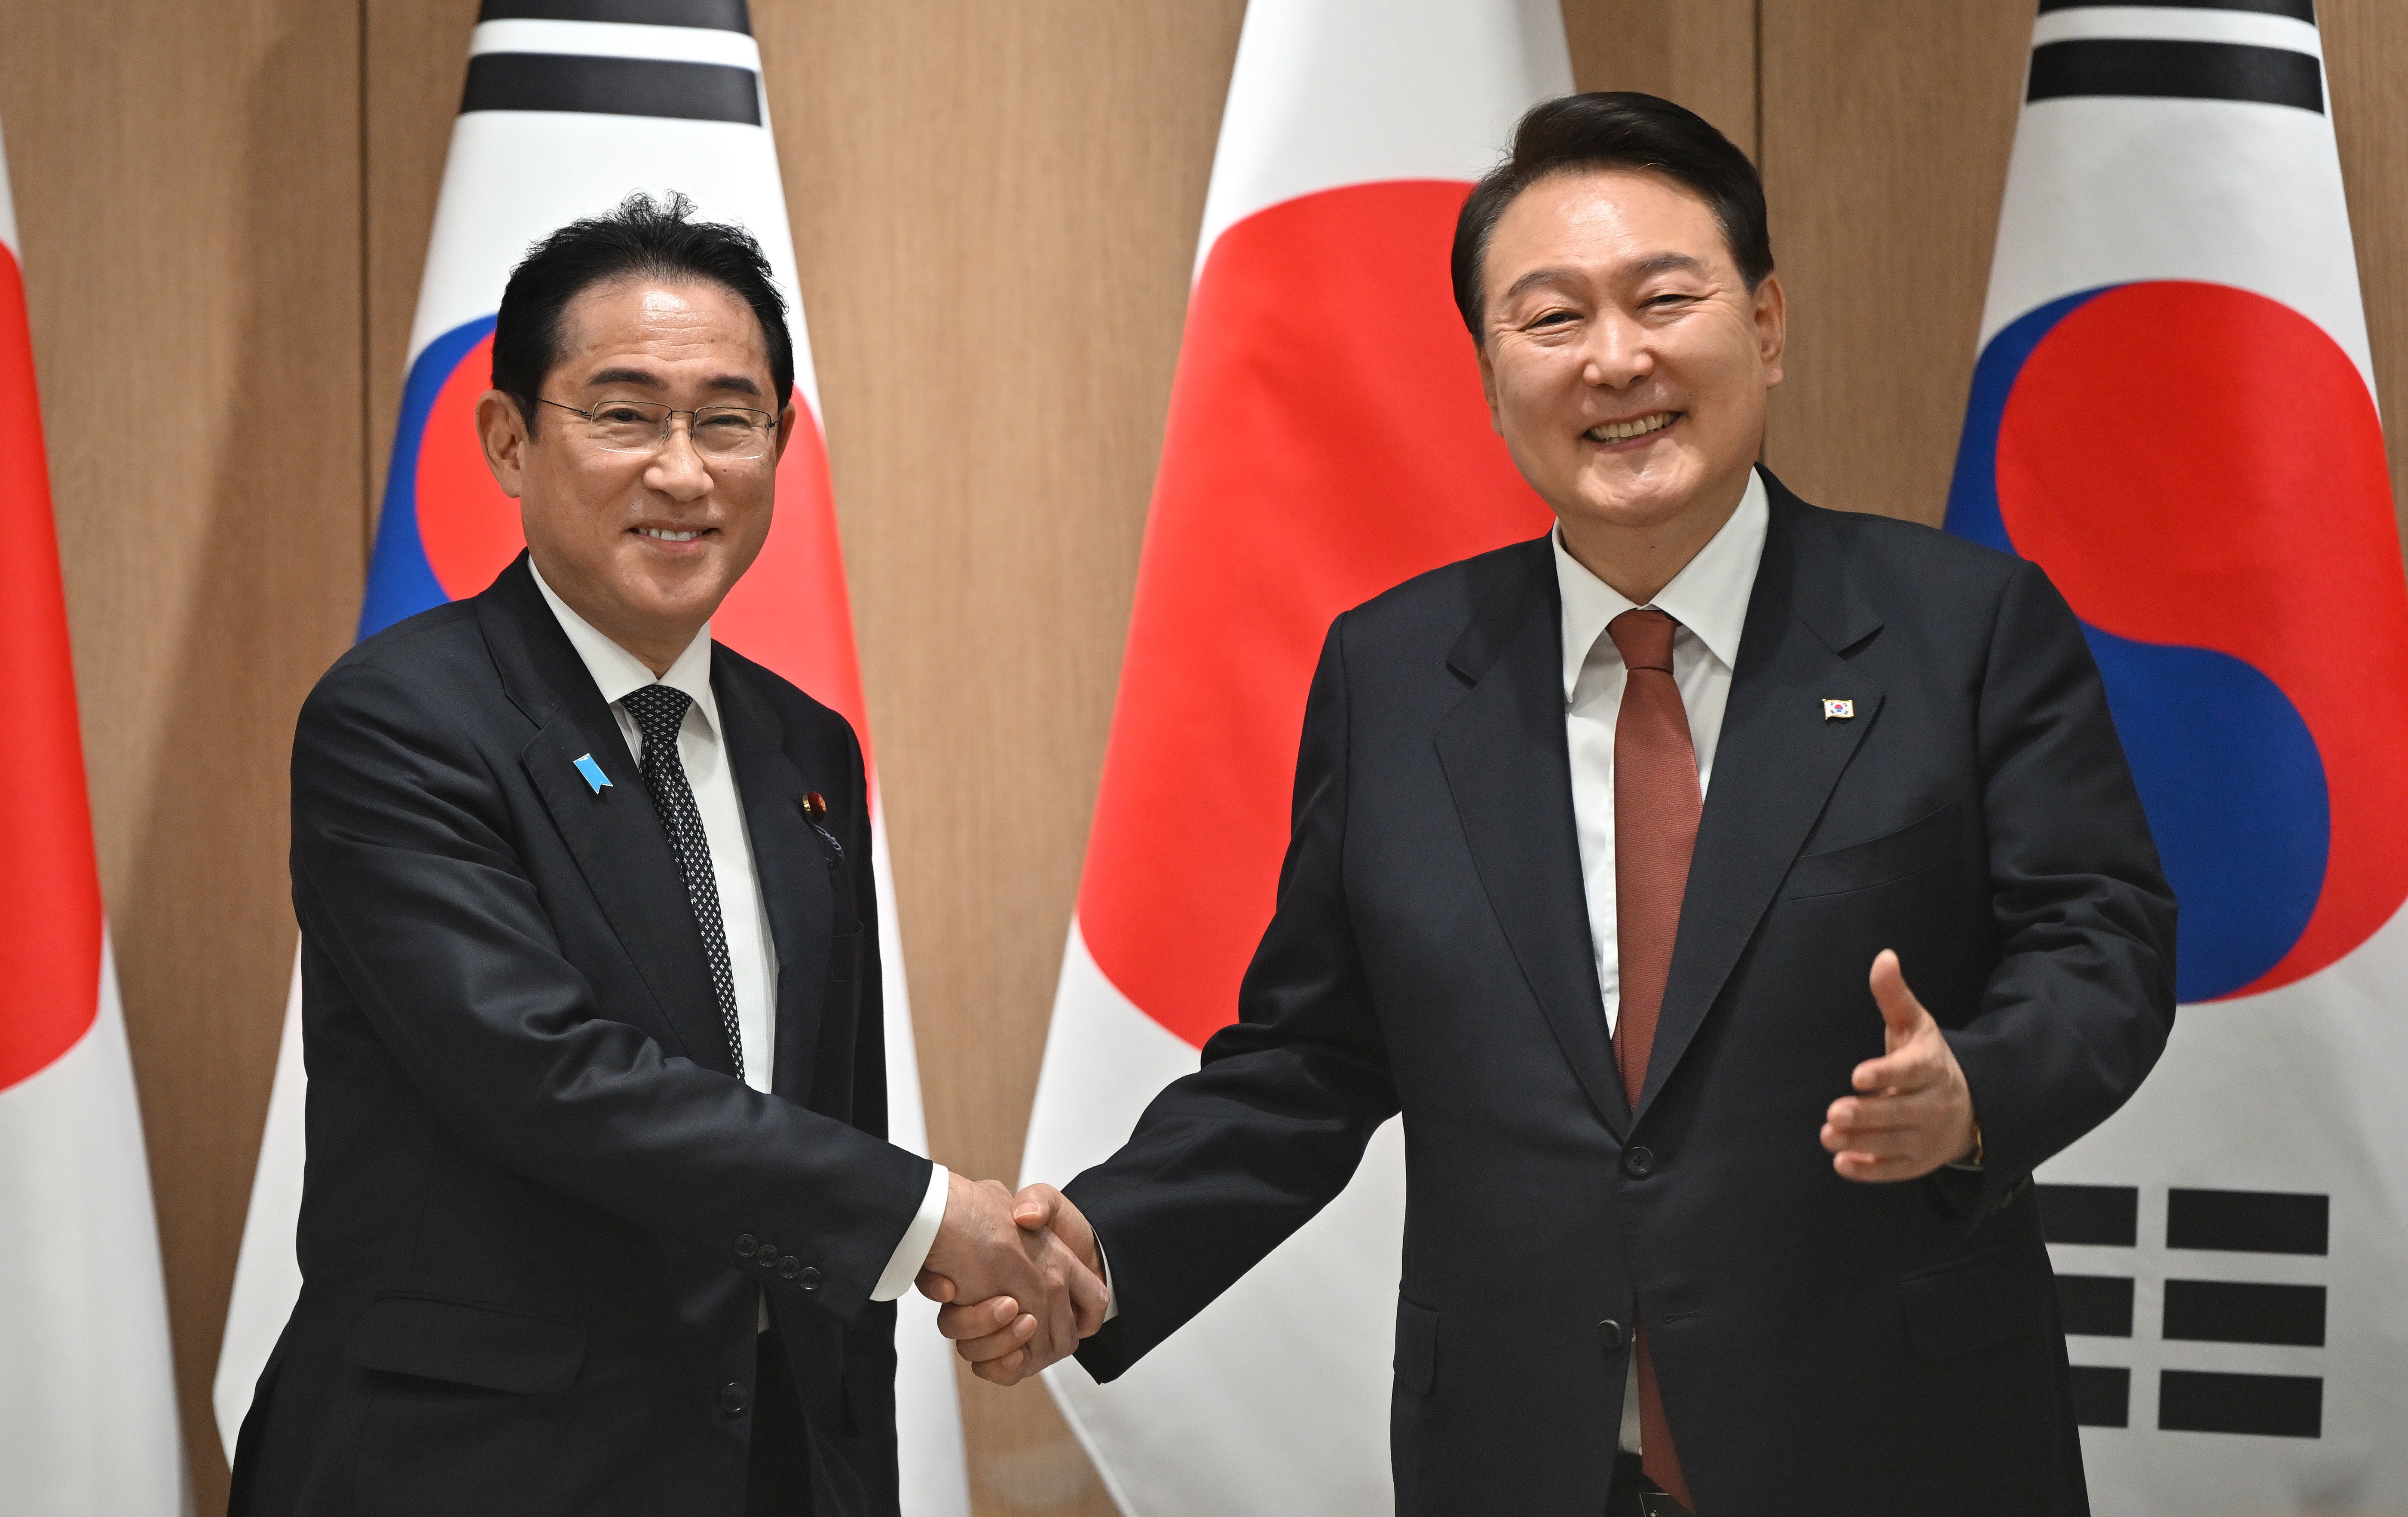 Yoon Suk Yeol shakes hands with Fumio Kishida (left) during their meeting at the former’s presidential office